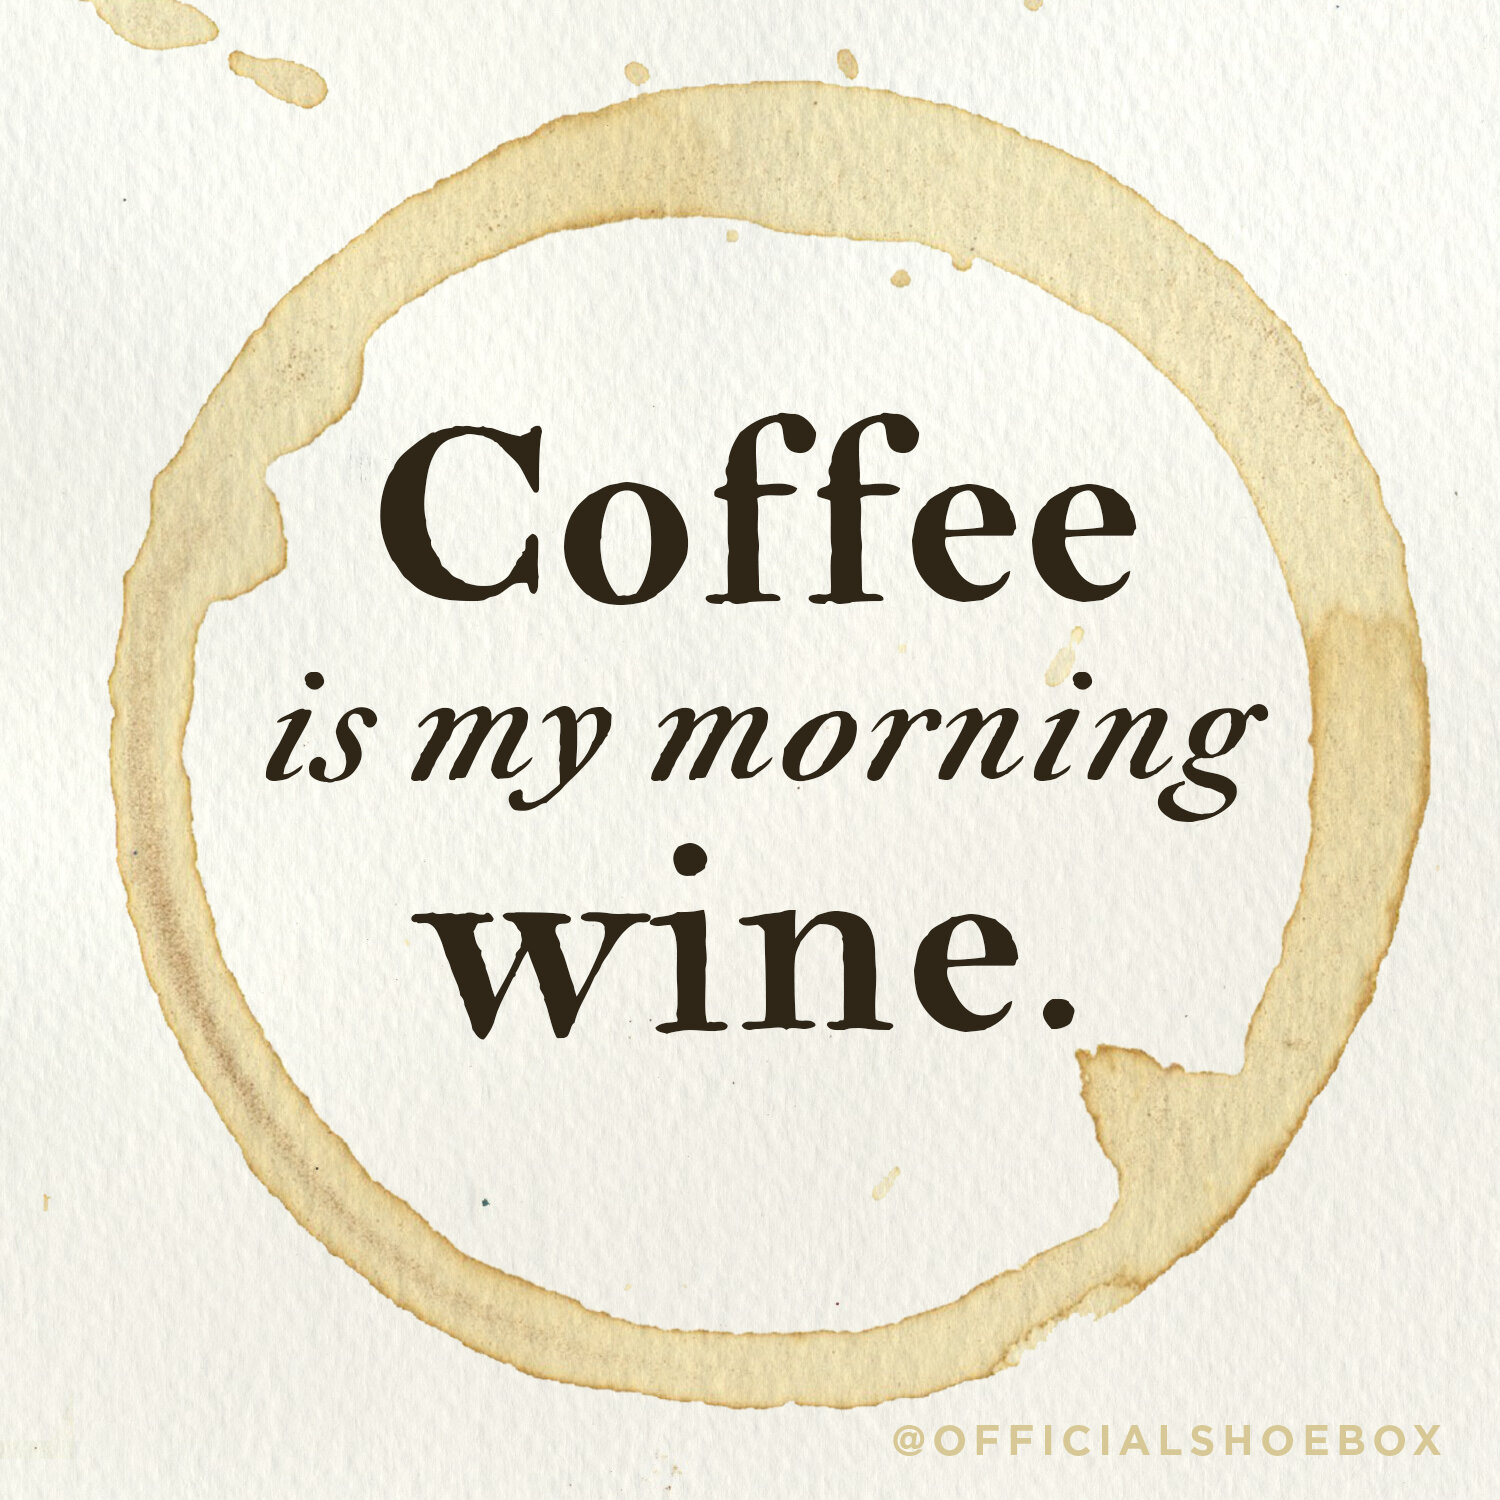 Coffee-QUotes-morning-wine.jpg